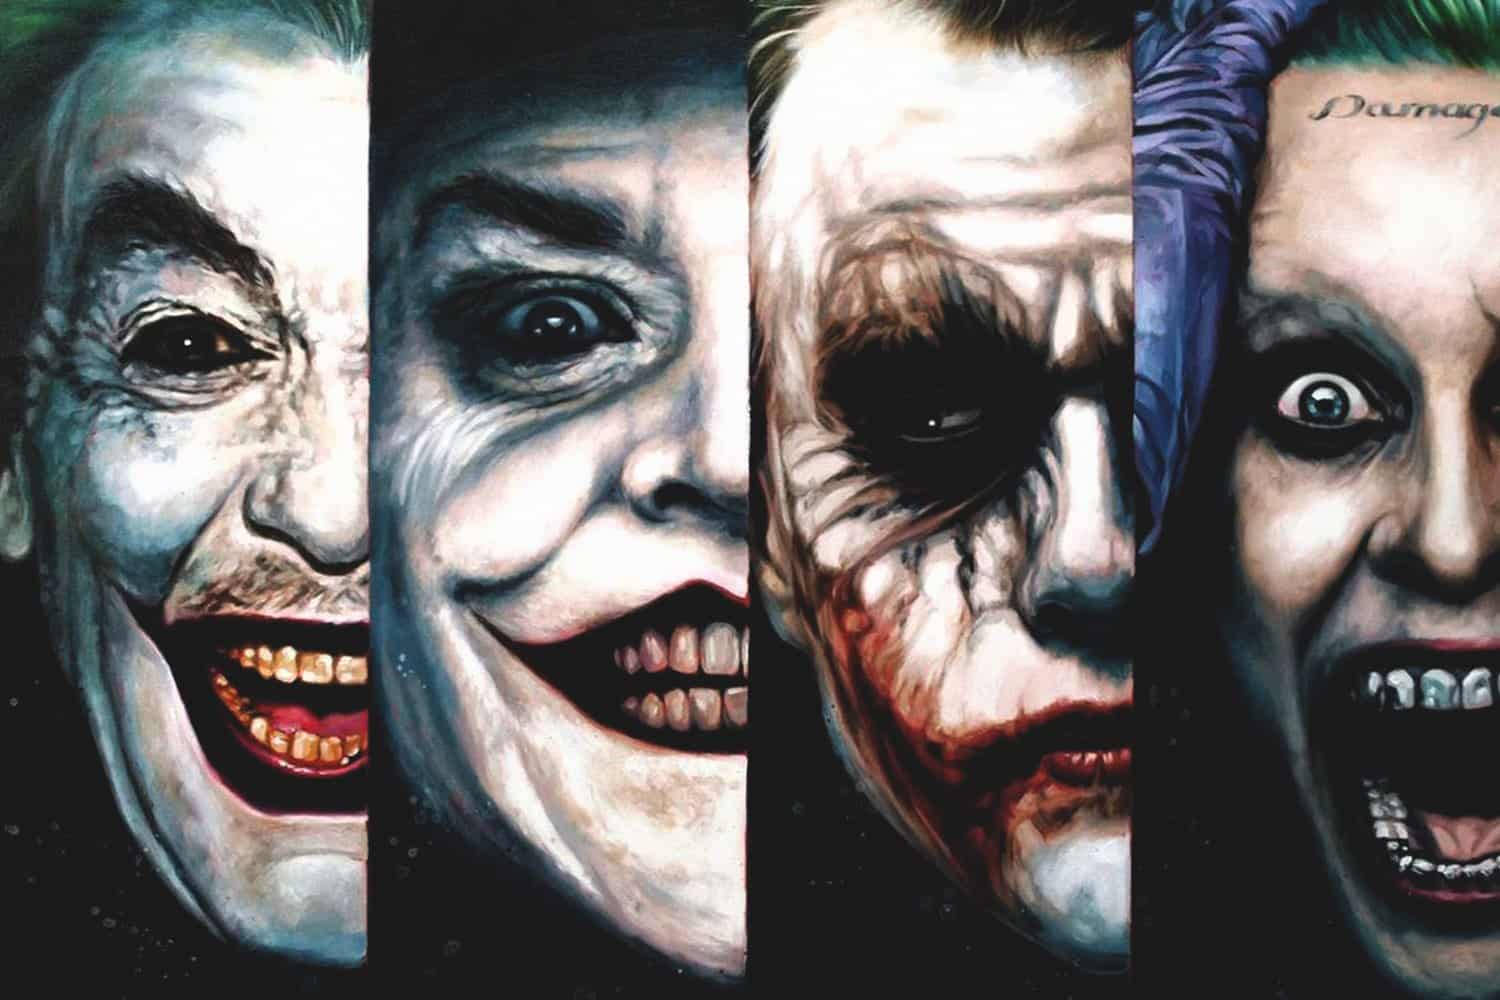 "Why So Serious?". Wallpaper